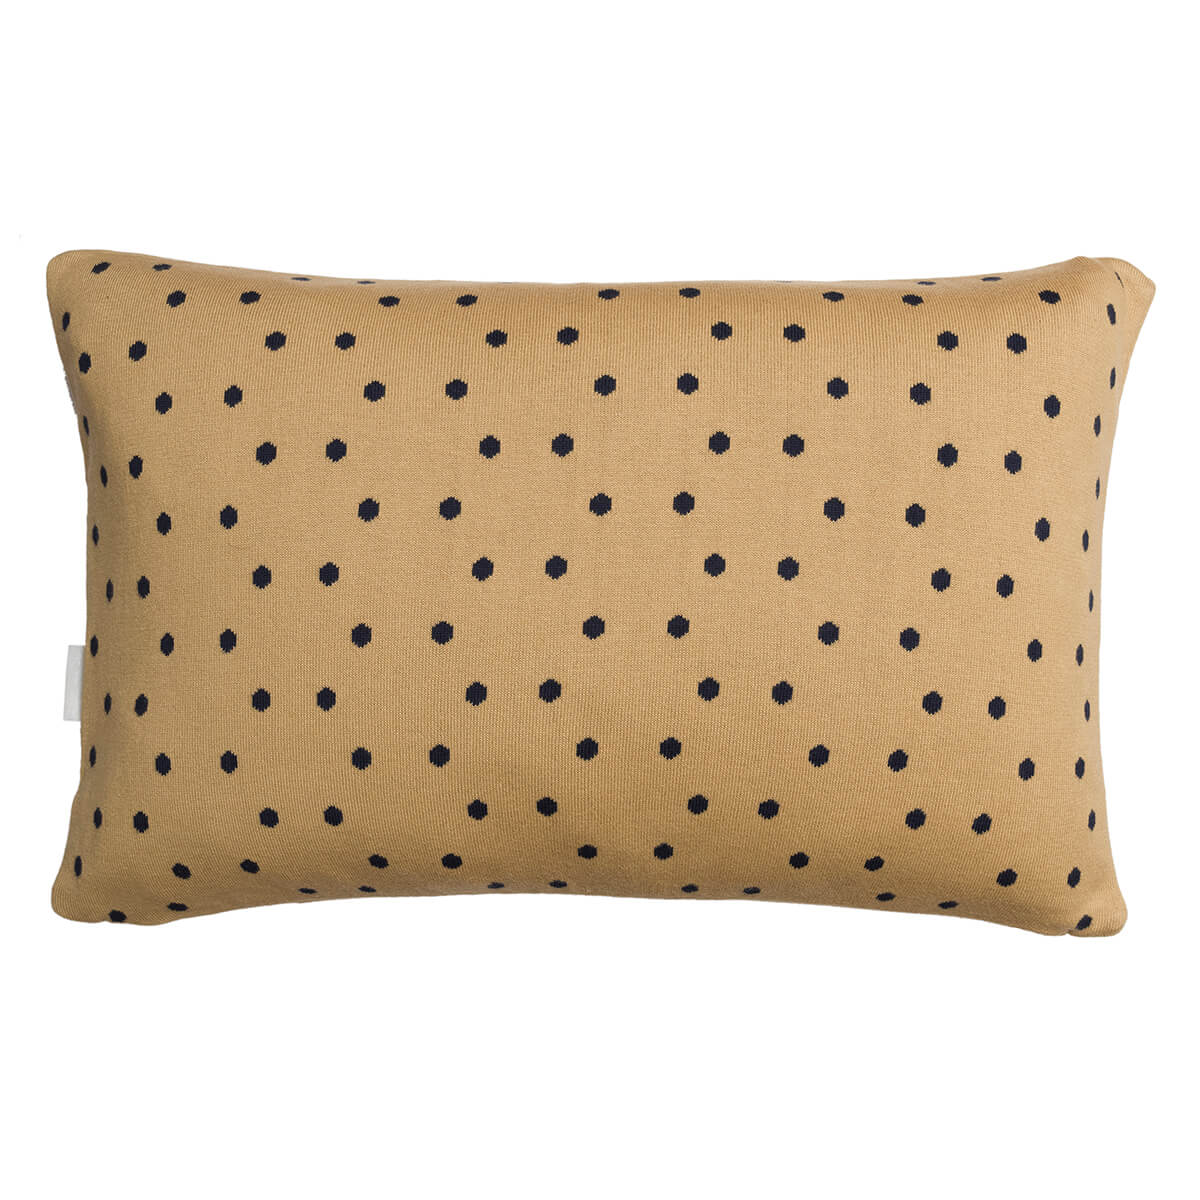 Bees Knitted Statement Cushion